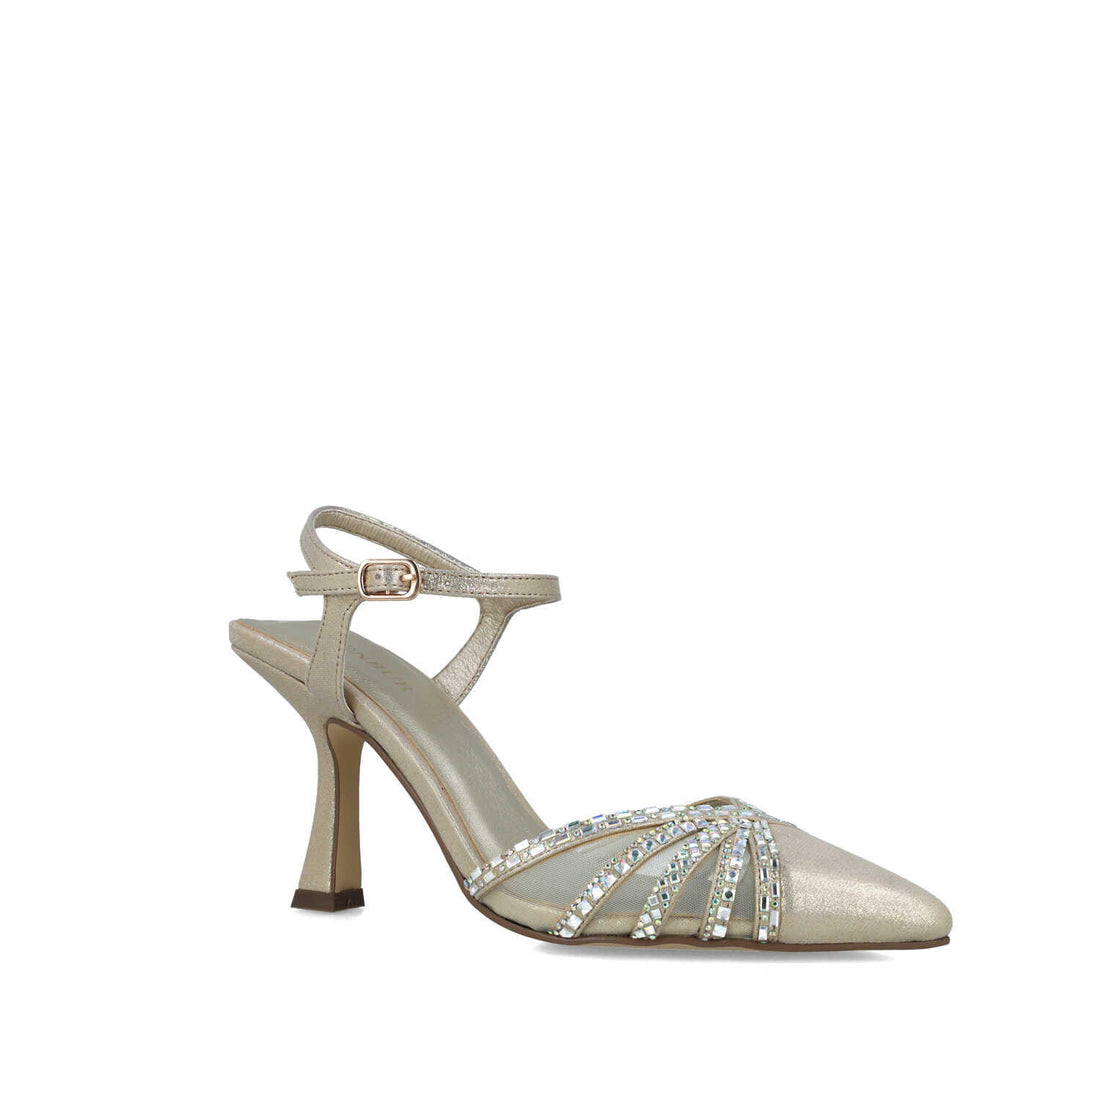 Gold Pumps With Ankle Strap_24734_00_02